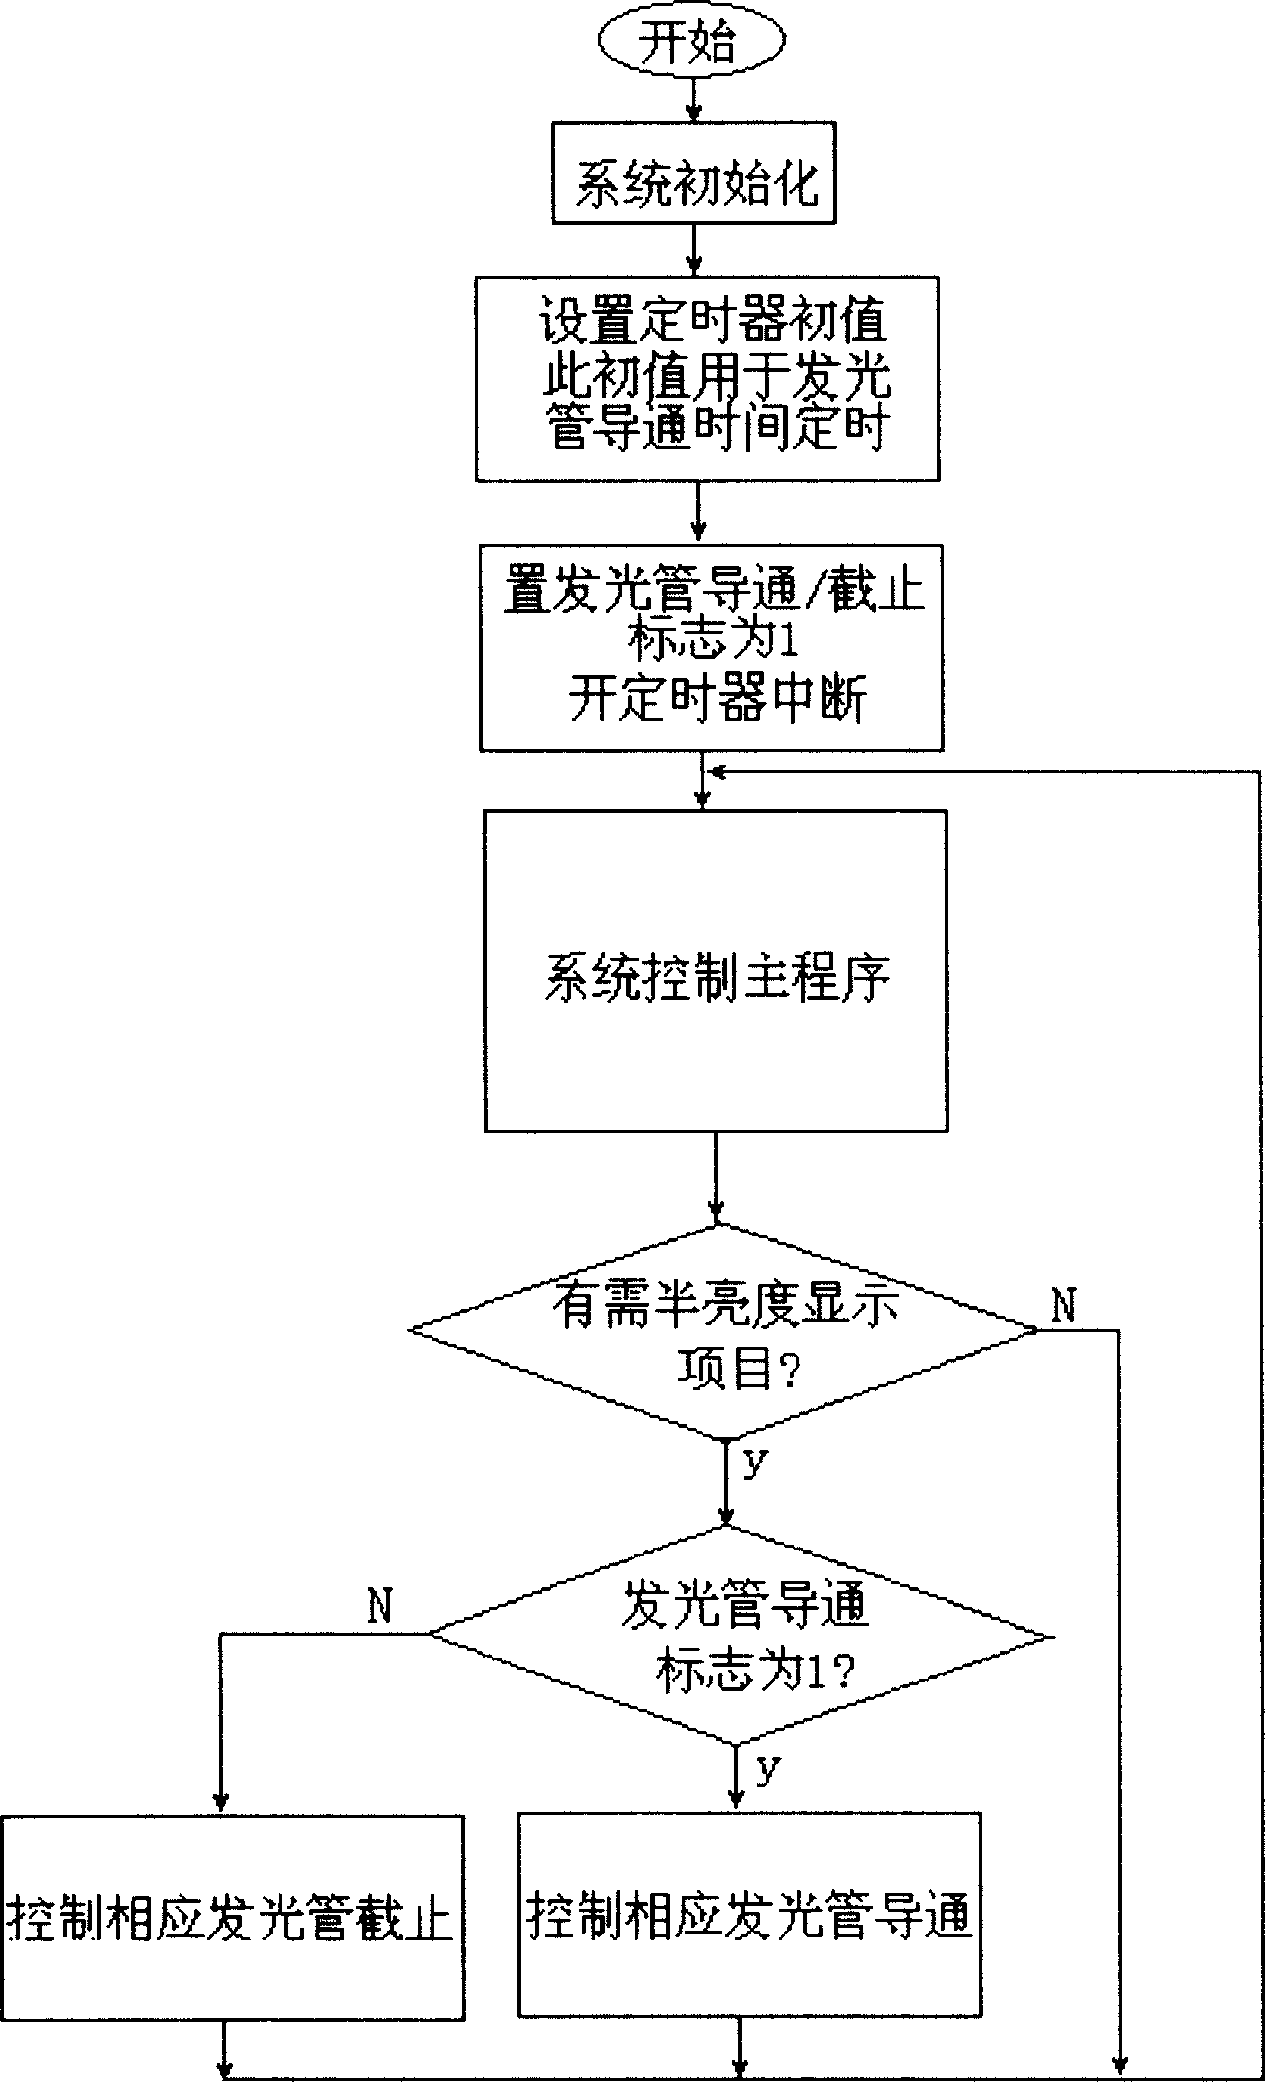 Display method for using LED half intensity as item background operation state and device